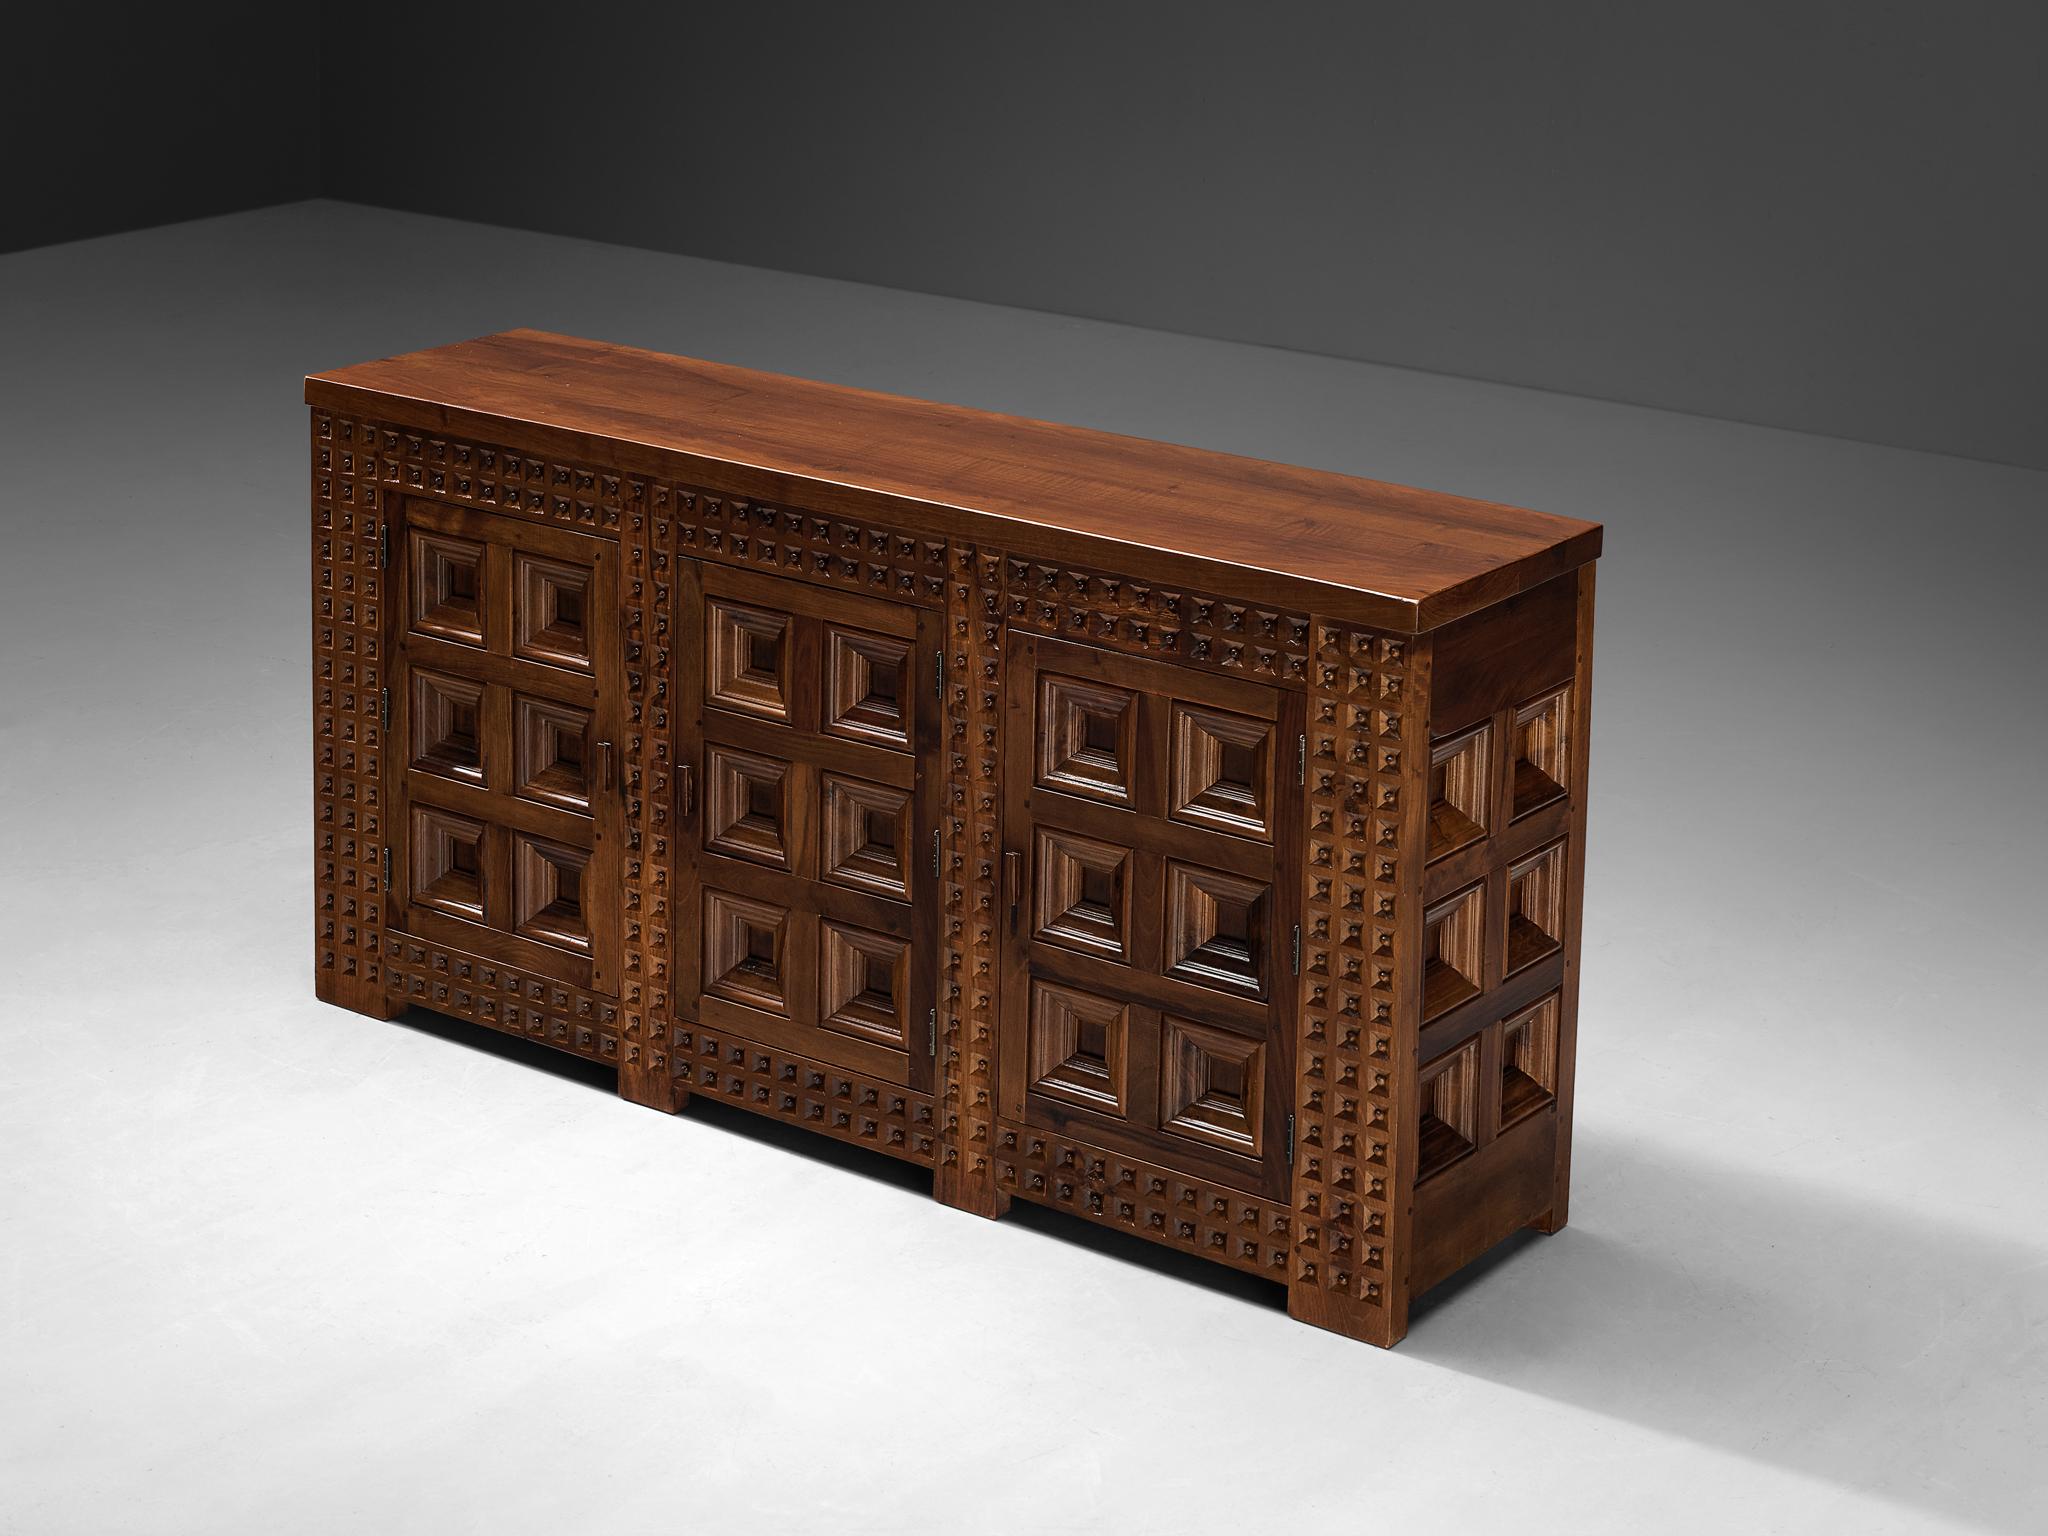 Spanish Brutalist Sideboard with Sophisticated Carvings in Walnut